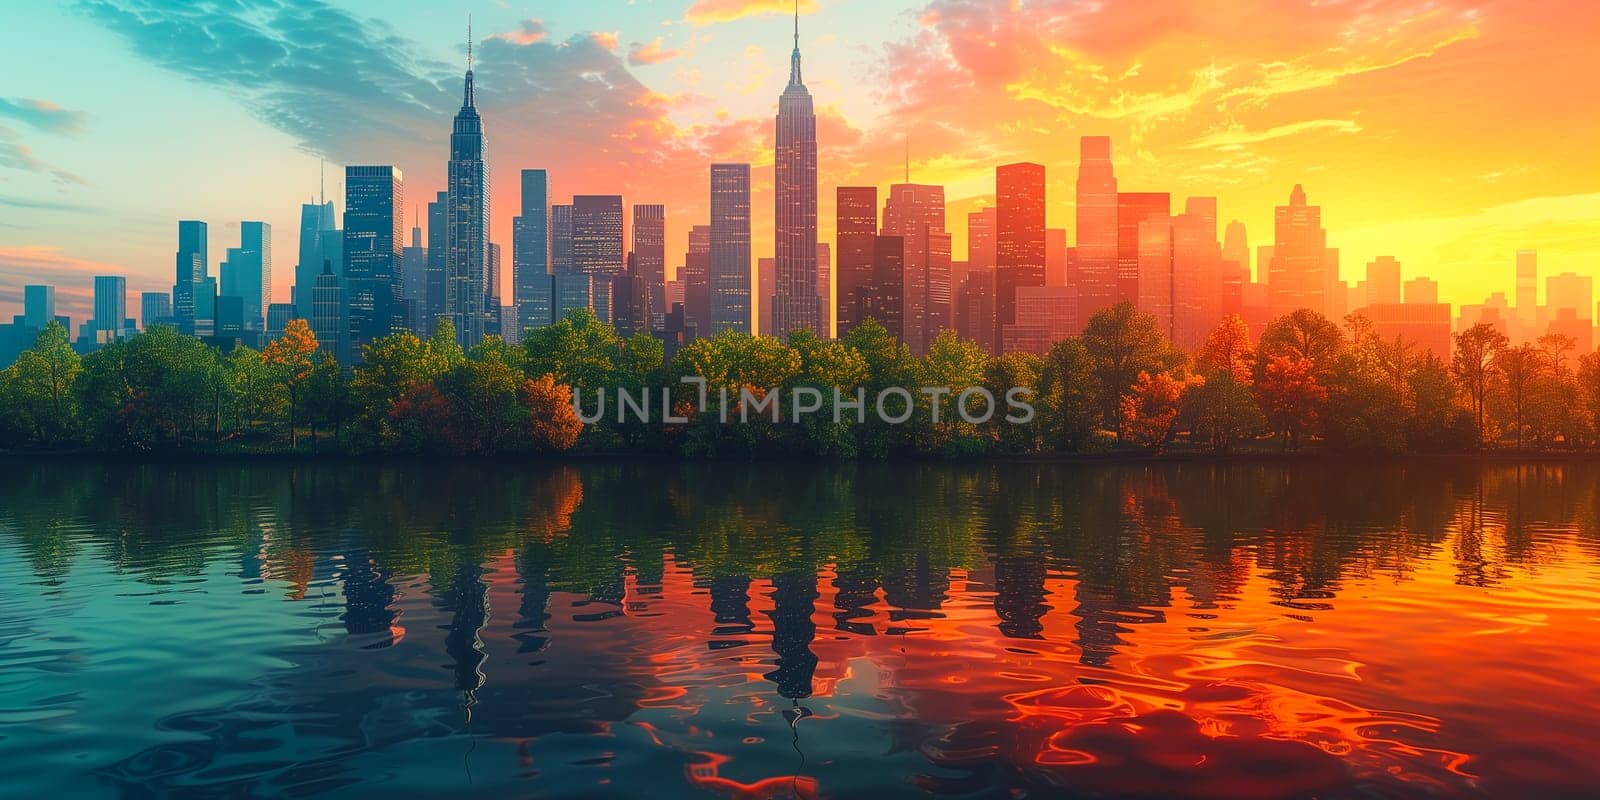 Beautiful abstract cityscape with skyscrapers, business buildings architecture, green park and lake. Concept of sustainable energy solution in beautiful sunset backlit.